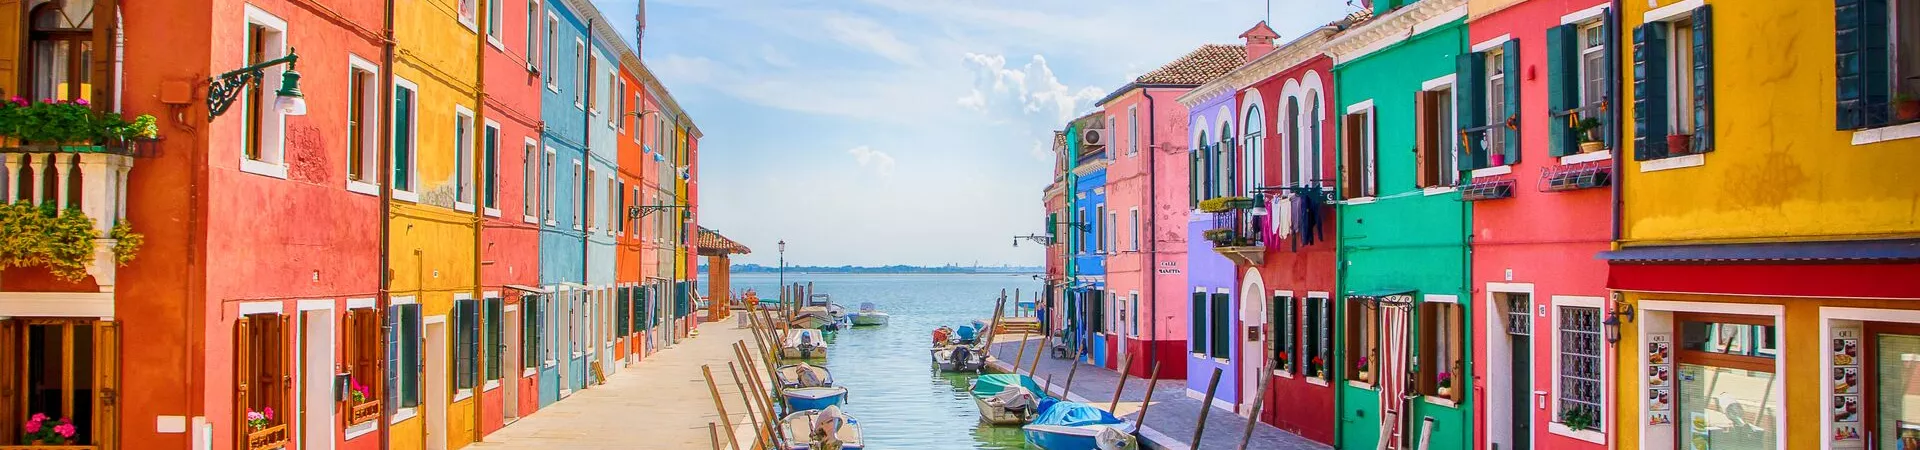 Large Burano Island The Colorful Traditional Fishing Village Near Of Venice Italy 1408827514 (1)